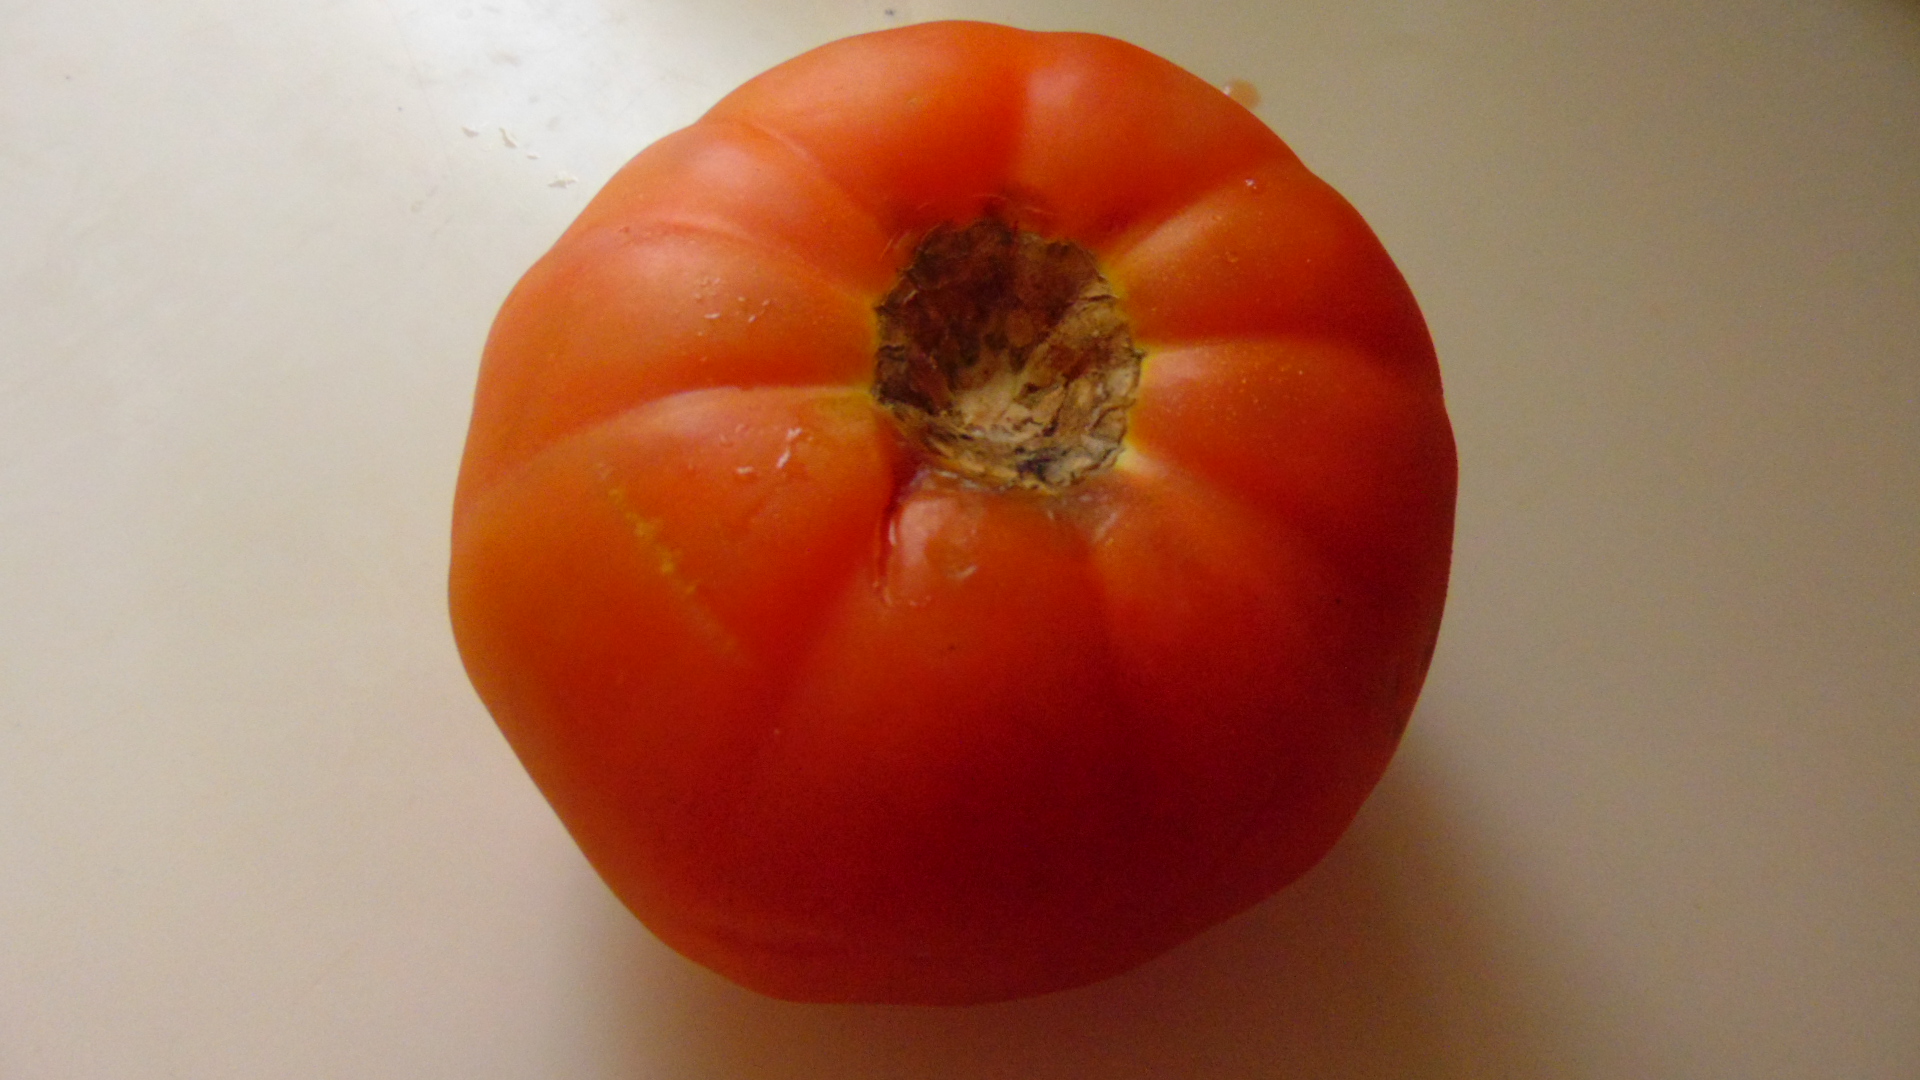 A big tomato from our garden.